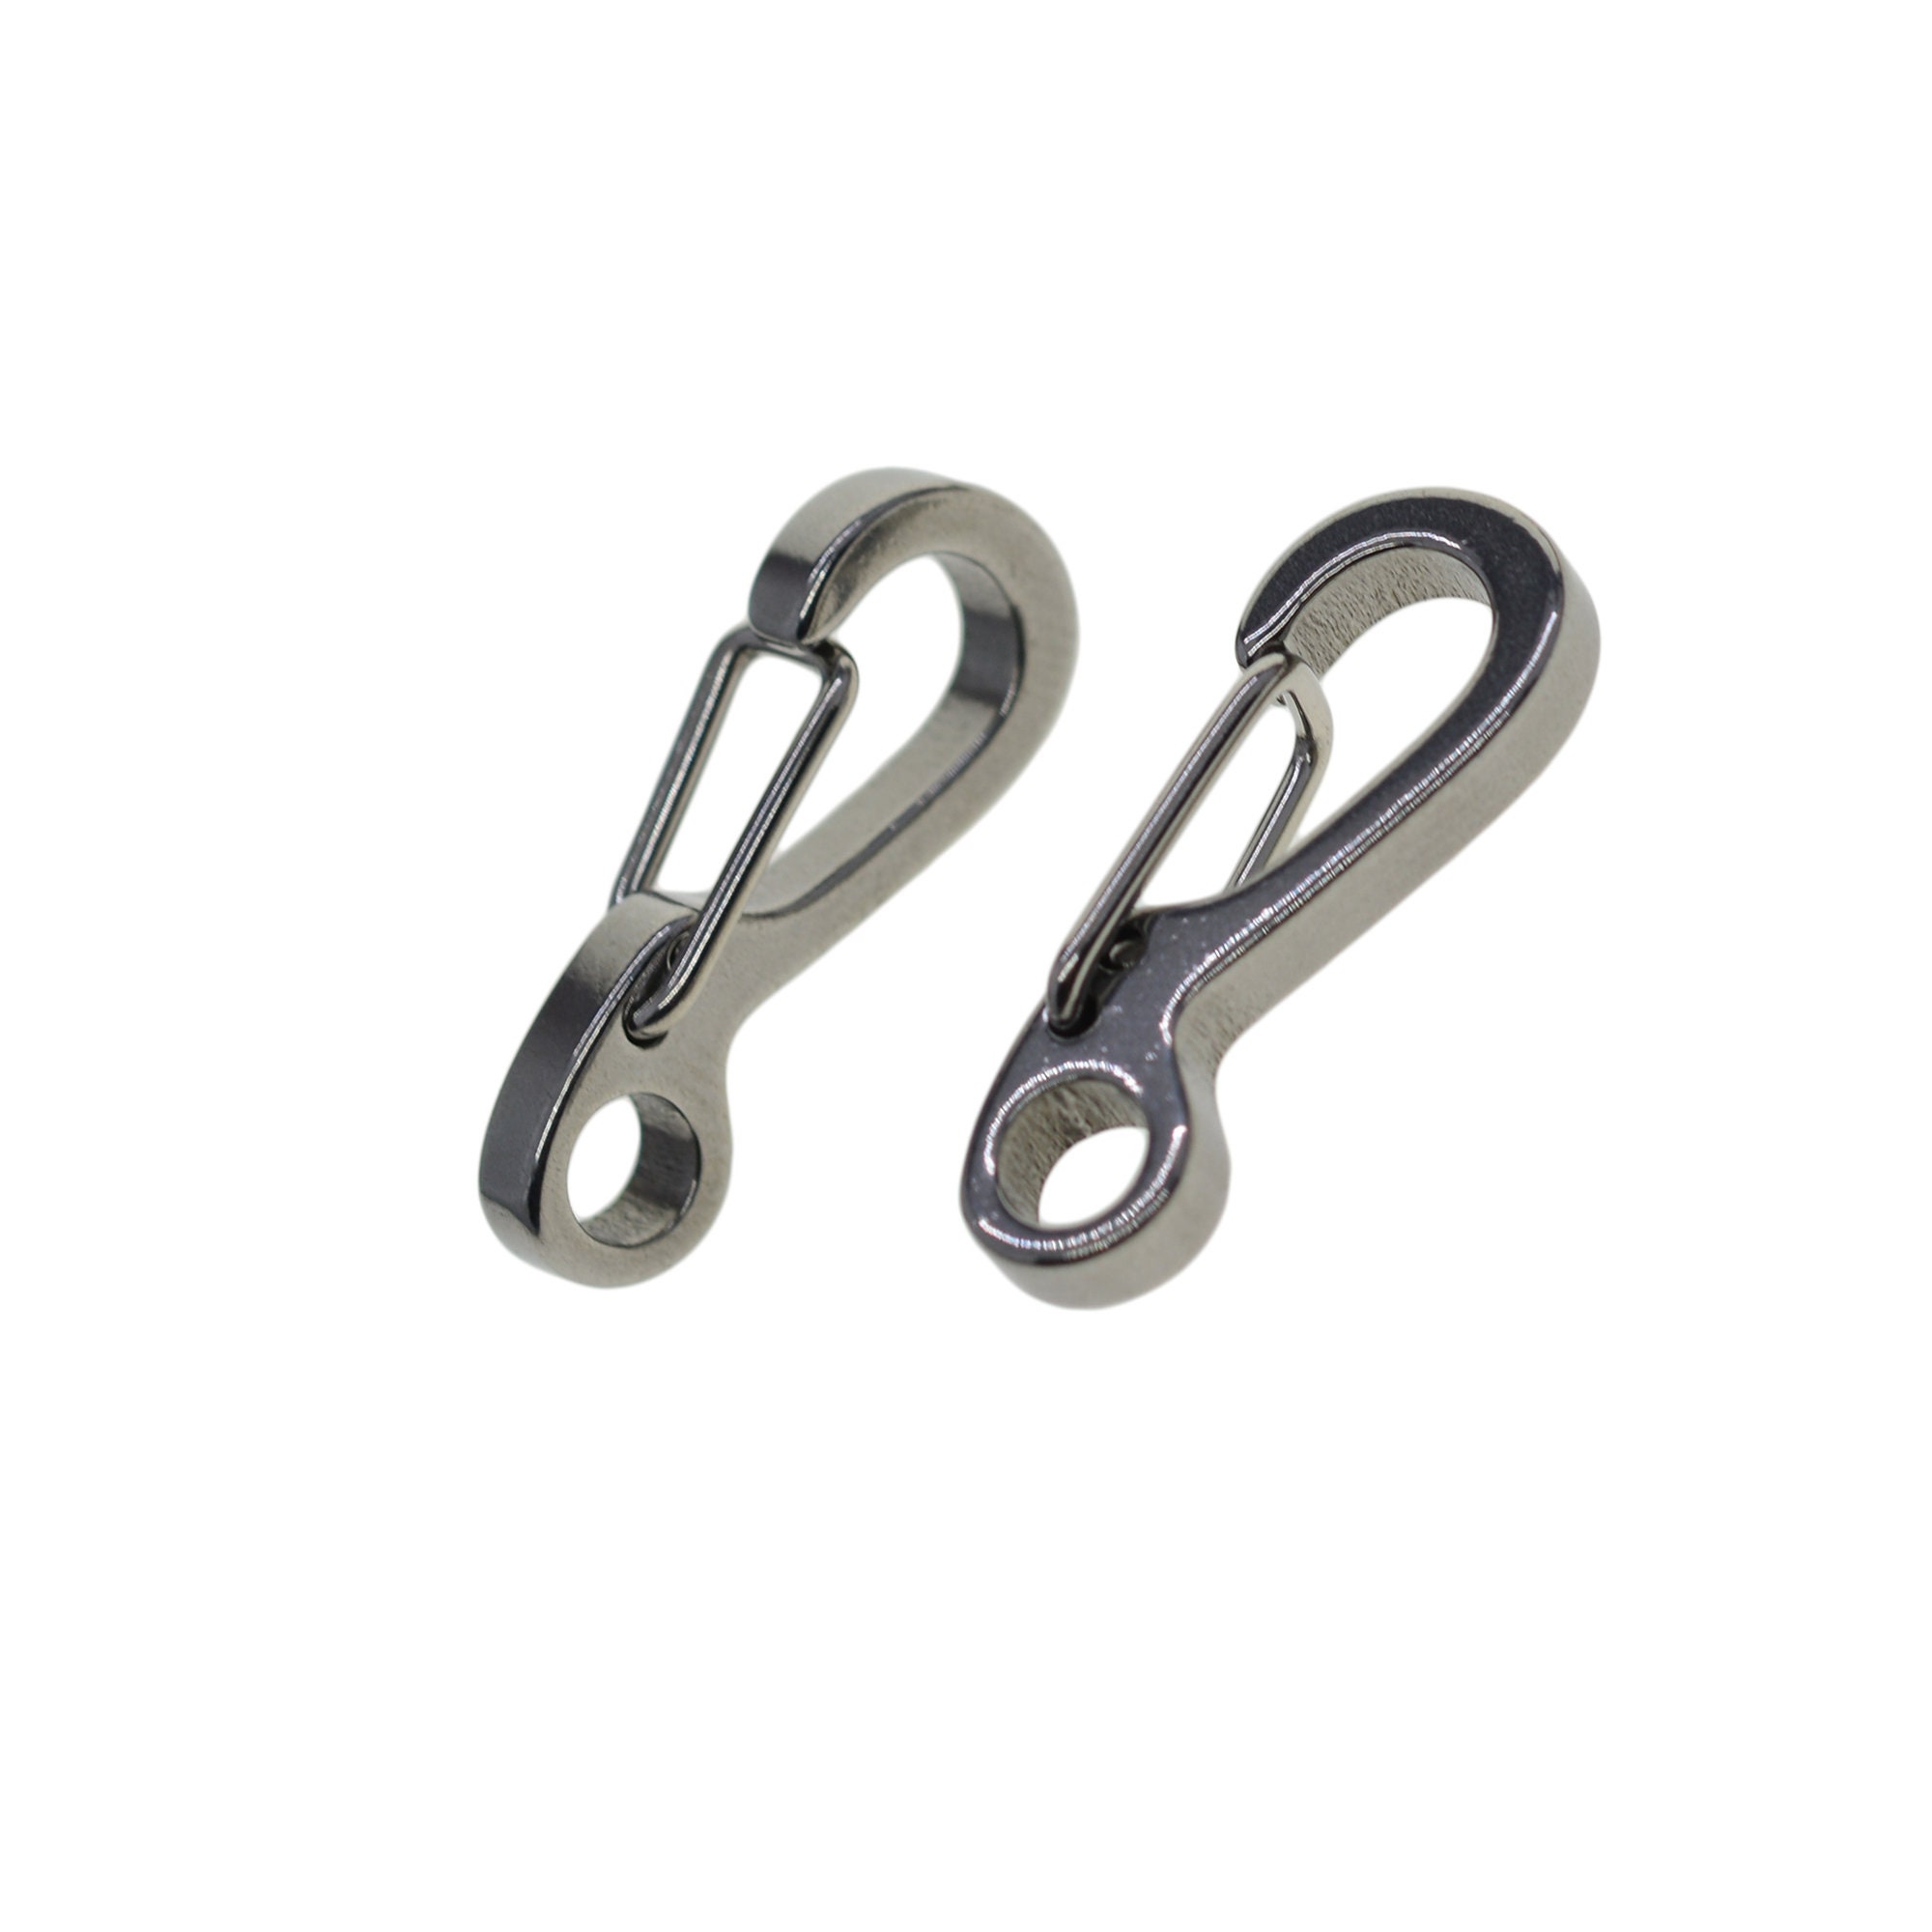 Quick Release Aluminum Hook for Keychain Carabiner Camping Spring Snap Clip  Promotion - China Hook, Camping Hook